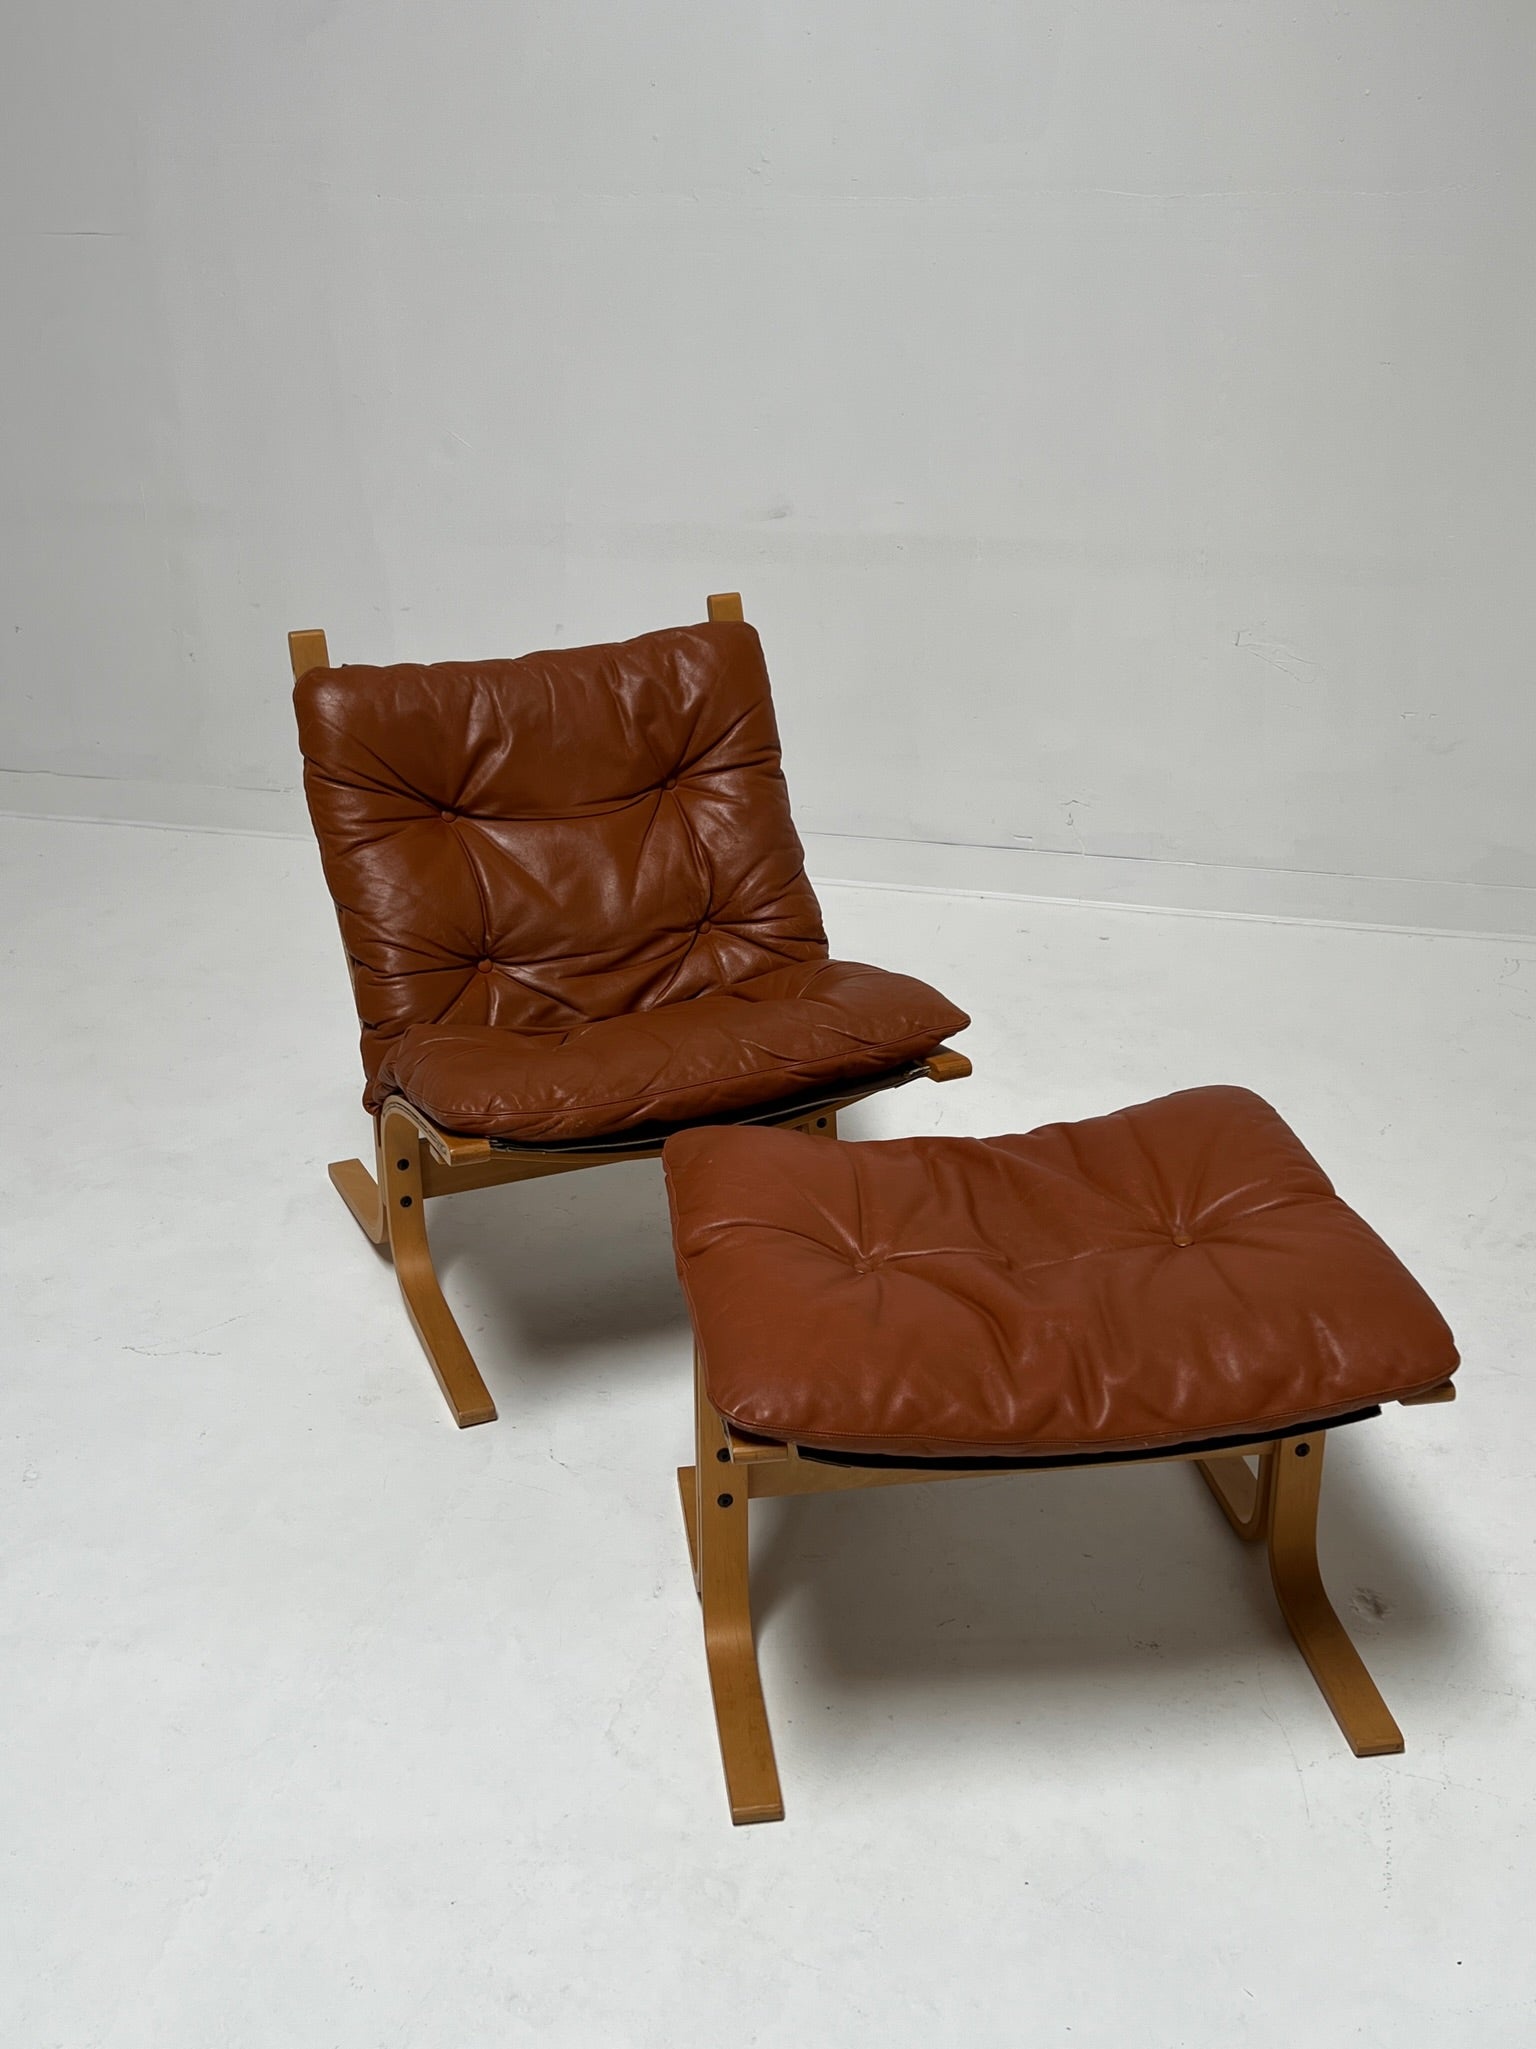 Ingmar Relling Siesta Leather Sling Chair Leather for Westnofa